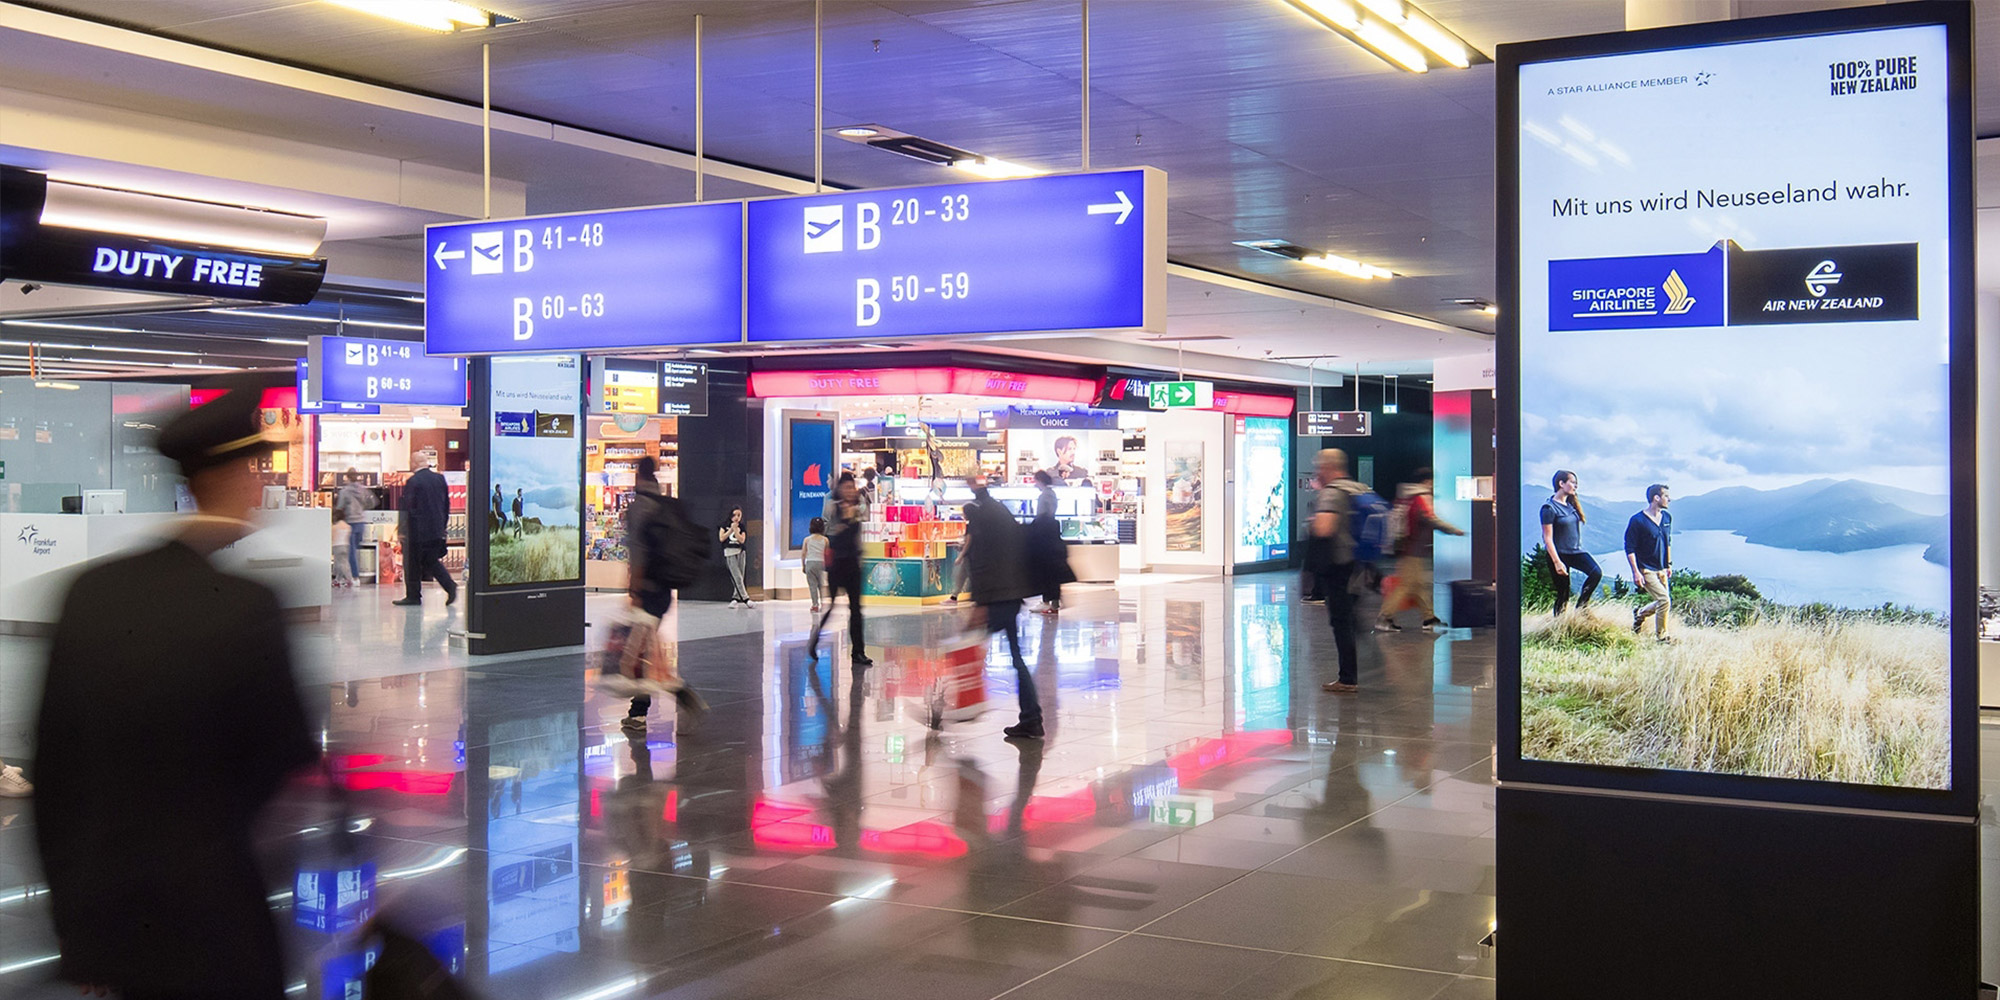 Airport Advertising Standards: Sustainable Airport Campaigns